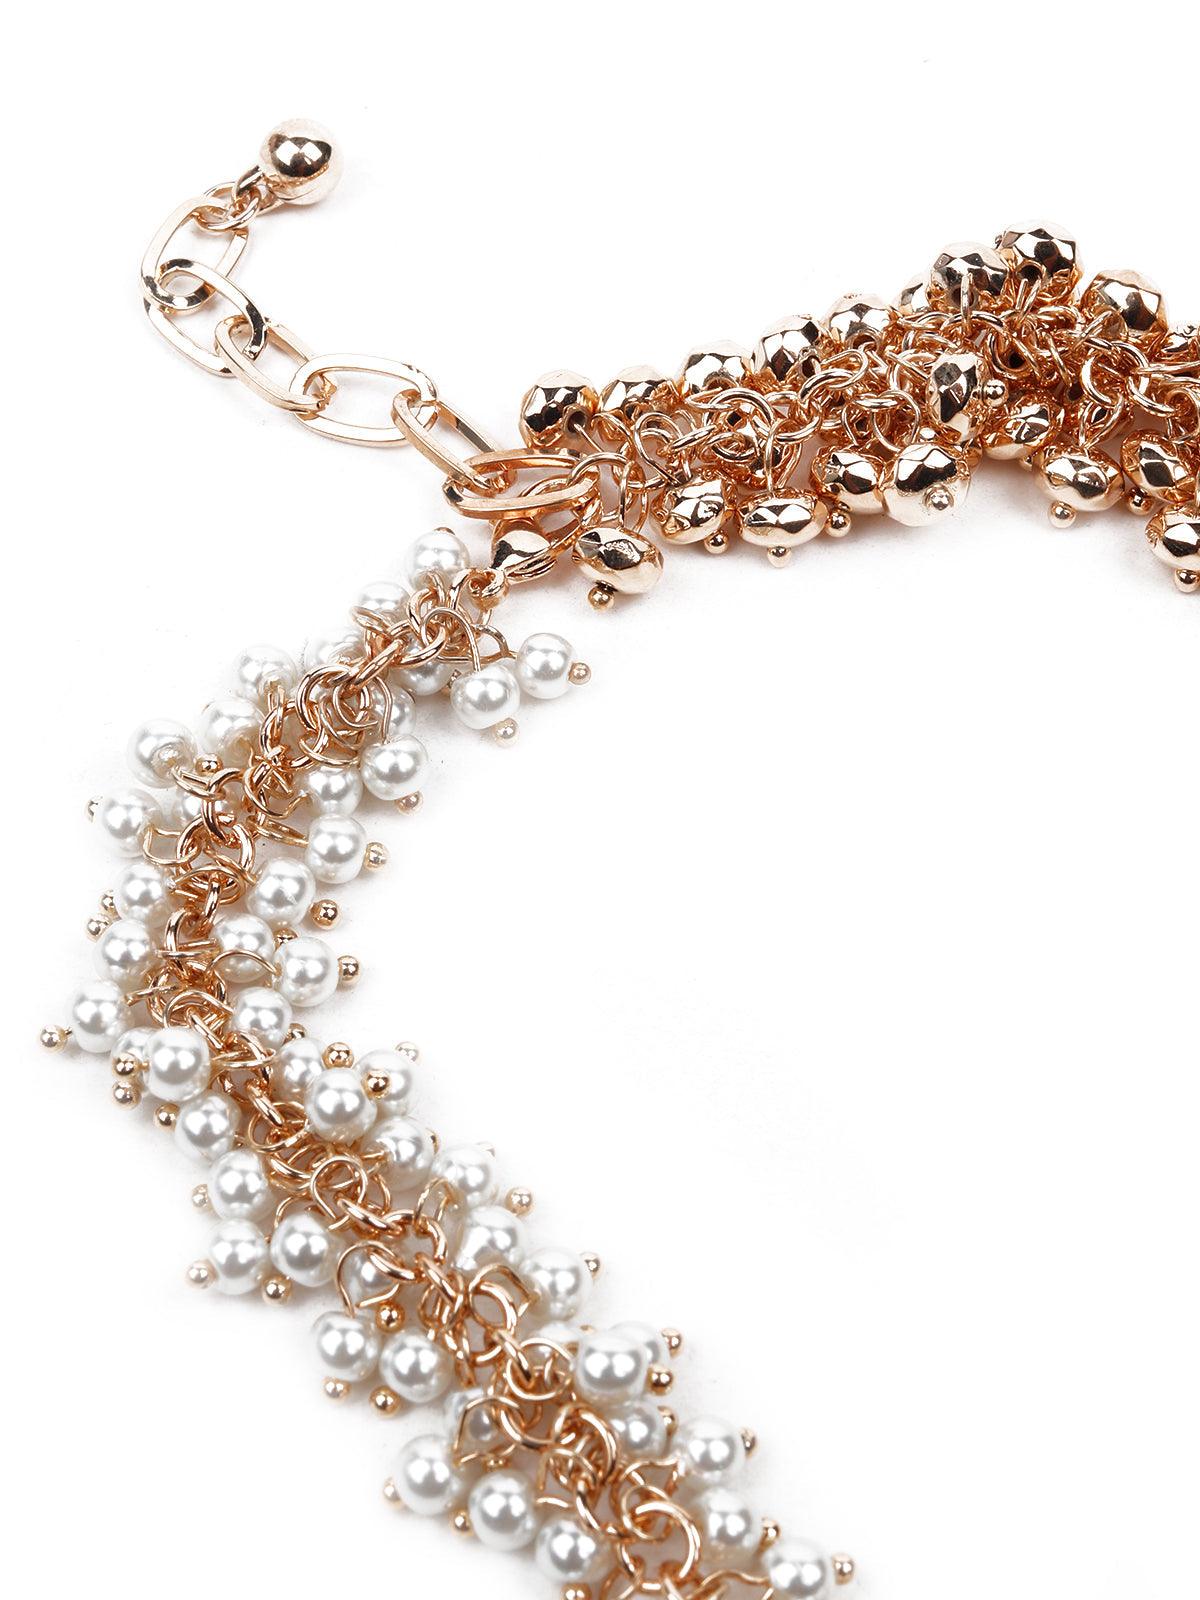 Women's Clustered White And Gold Stunning Necklace - Odette